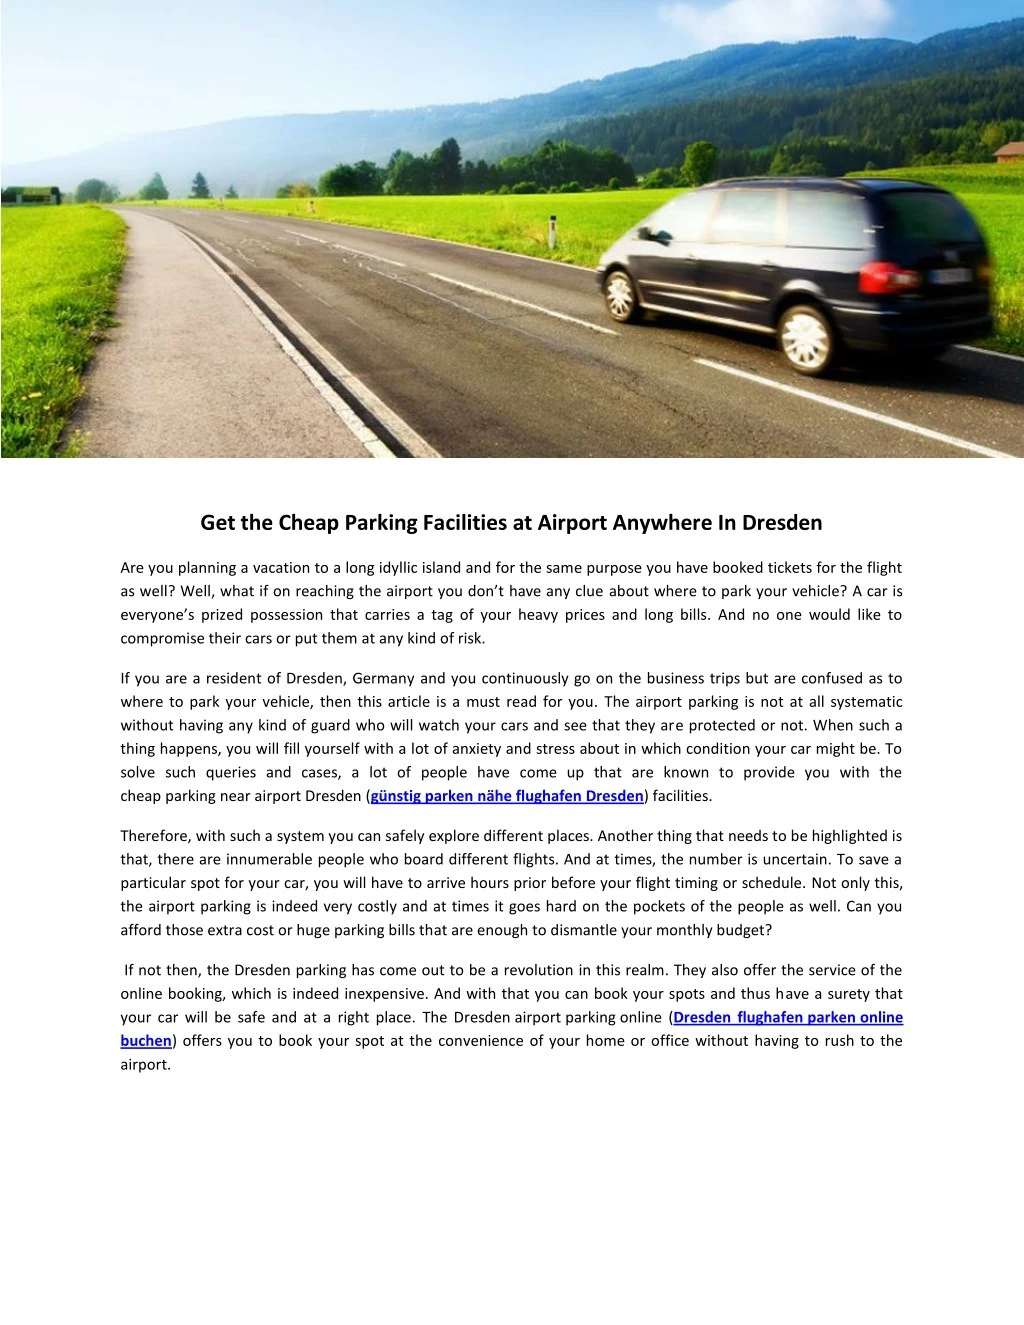 get the cheap parking facilities at airport